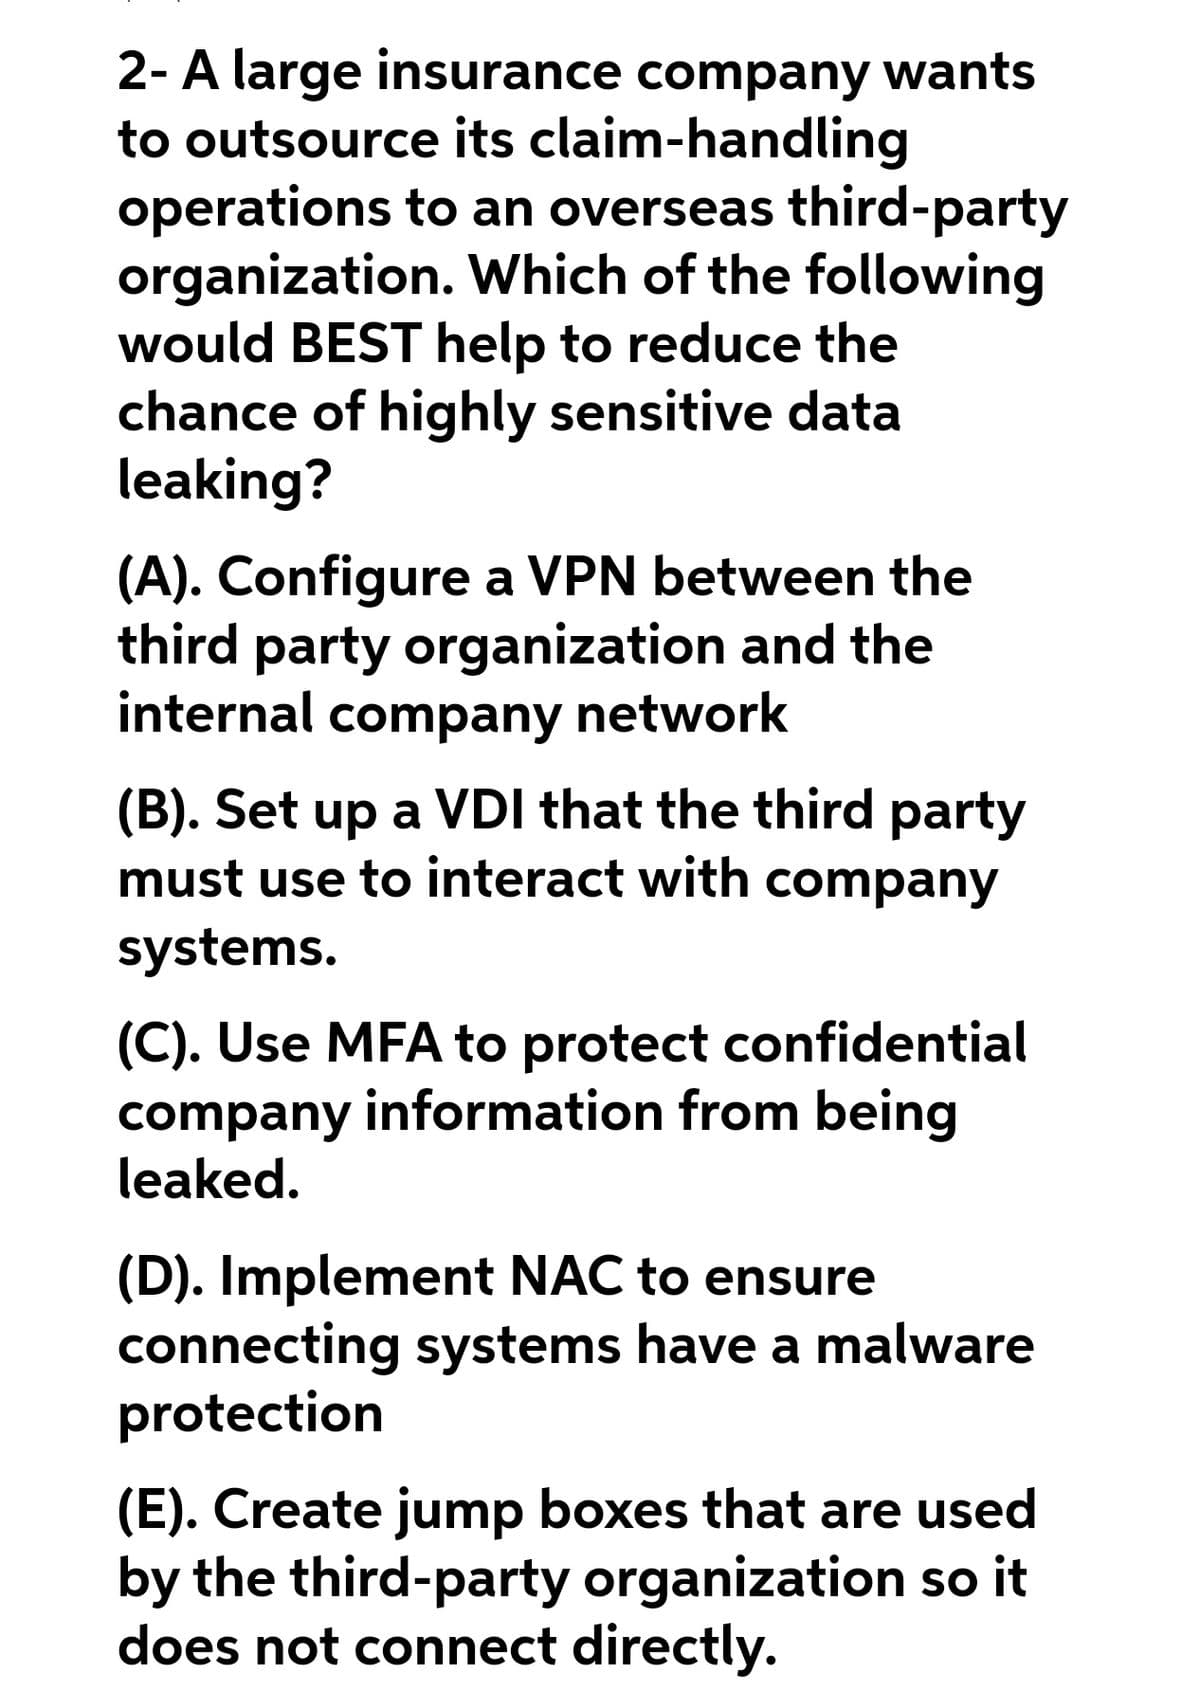 2- A large insurance company wants
to outsource its claim-handling
operations to an overseas third-party
organization. Which of the following
would BEST help to reduce the
chance of highly sensitive data
leaking?
(A). Configure a VPN between the
third party organization and the
internal company network
(B). Set up a VDI that the third party
must use to interact with company
systems.
(C). Use MFA to protect confidential
company information from being
leaked.
(D). Implement NAC to ensure
connecting systems have a malware
protection
(E). Create jump boxes that are used
by the third-party organization so it
does not connect directly.
